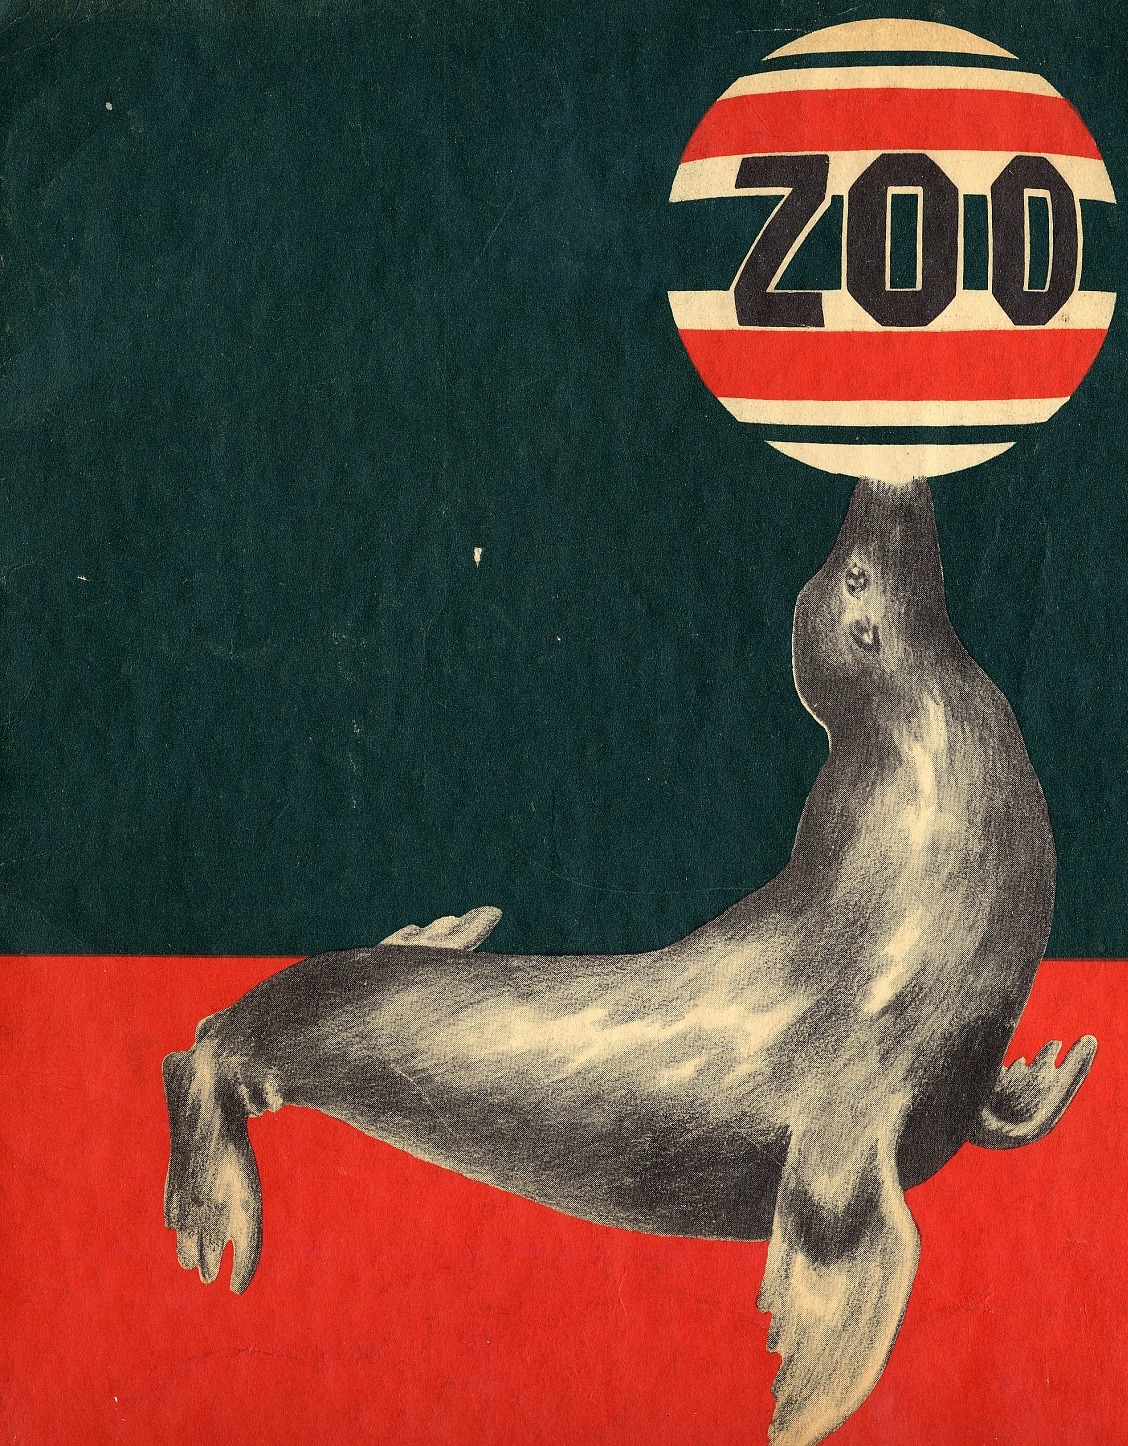 Image of a seal balancing a ball on its nose. The ball says Zoo.